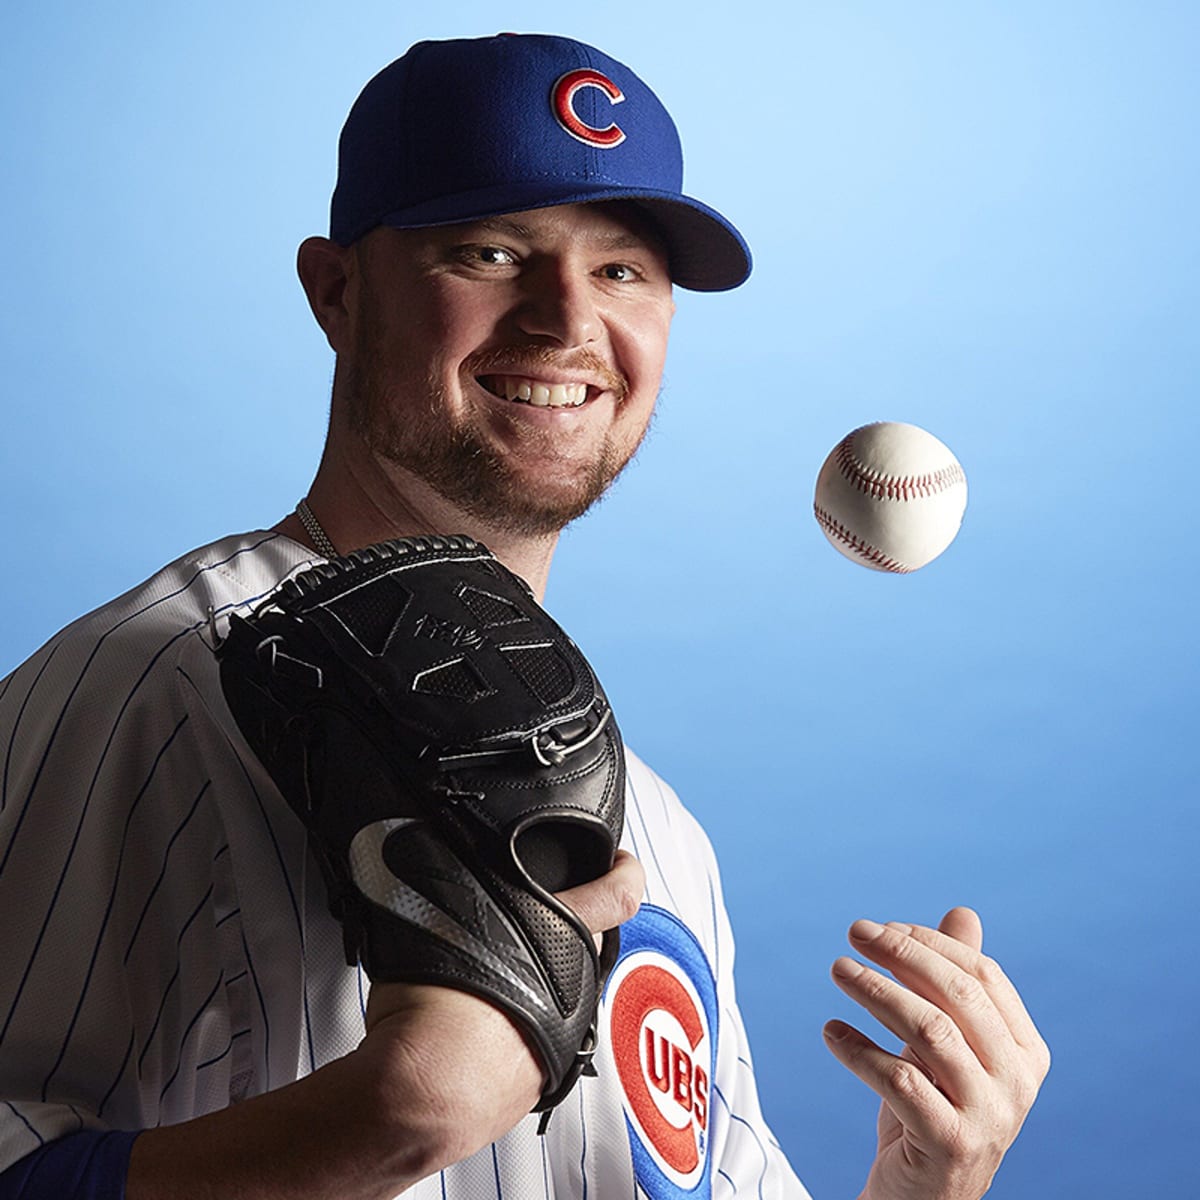 Jon Lester's Glove Contained a Green Substance, Was He Cheating? [UPDATE]